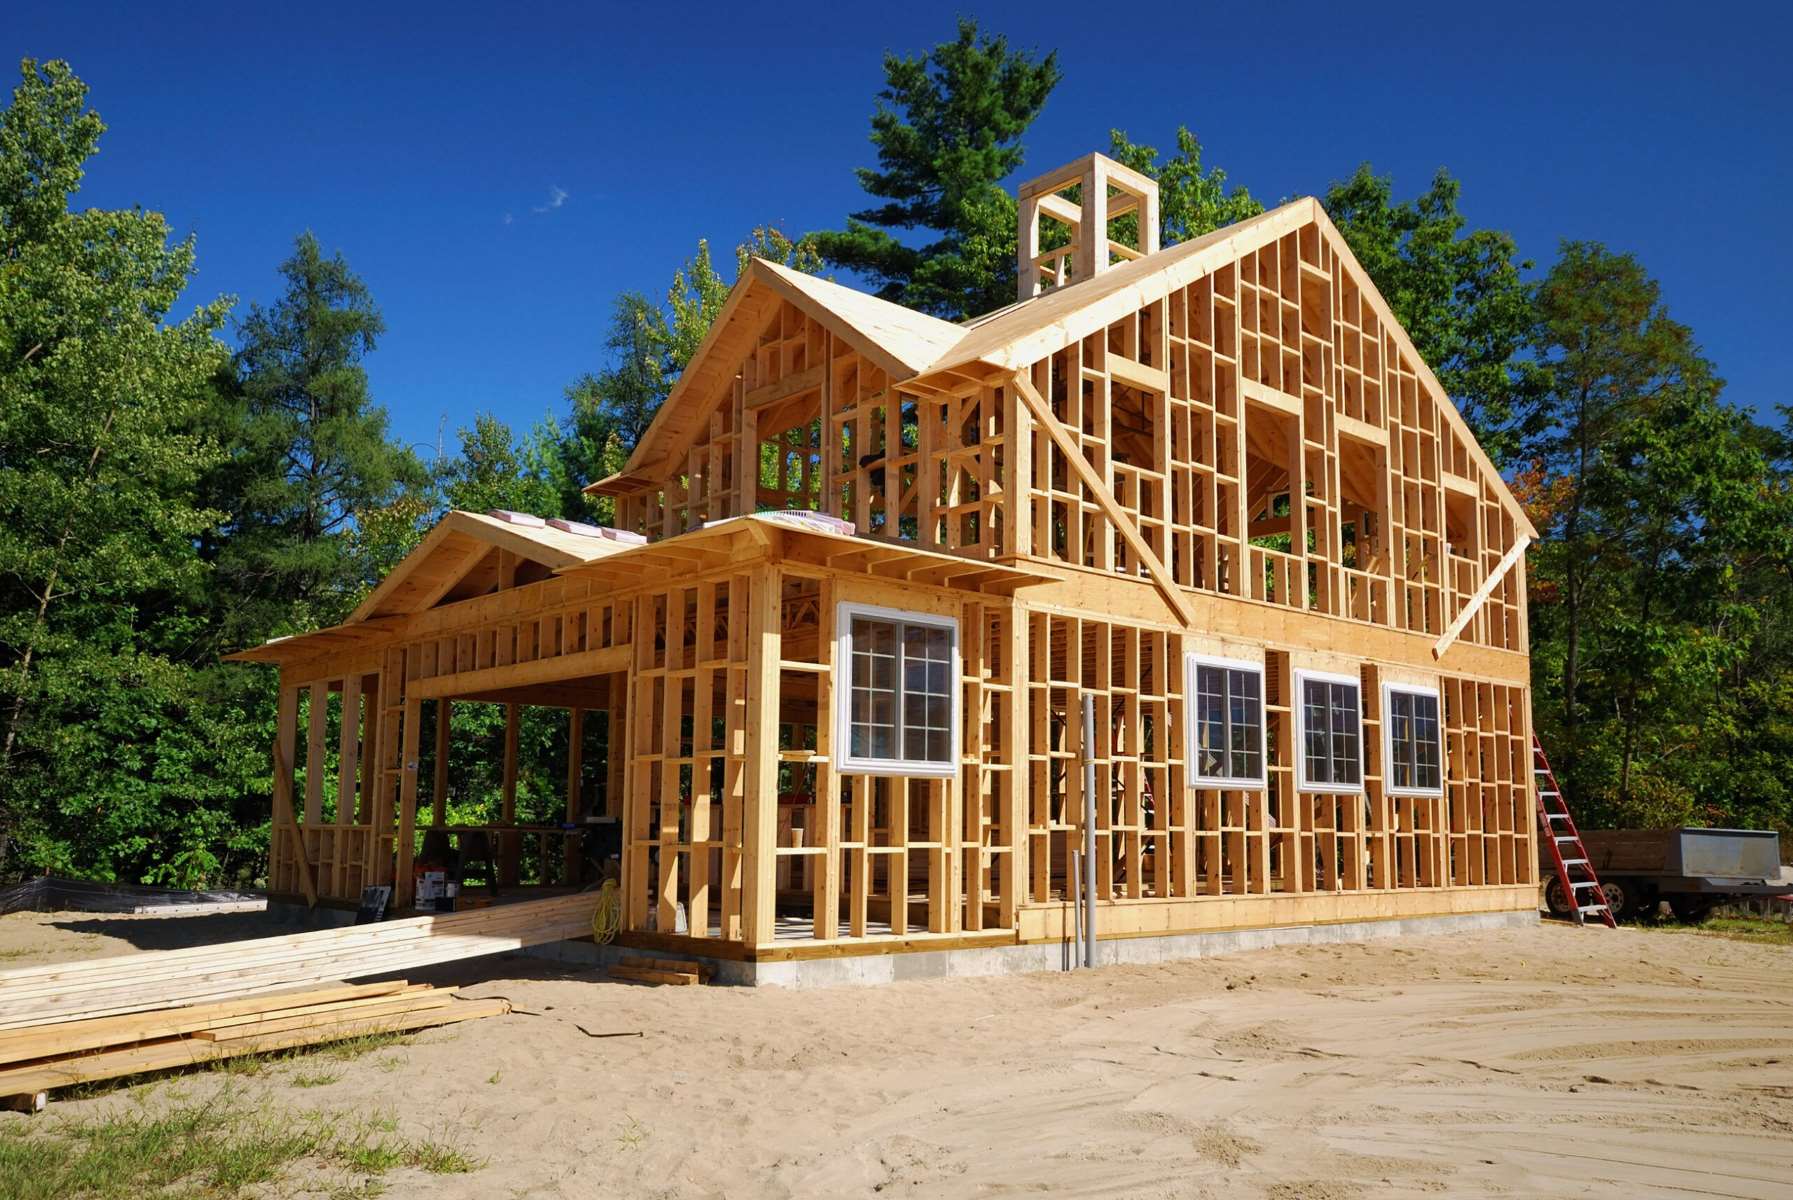 Build A House On Your Land Without Permits Or Permission - No Rules, No Limits!